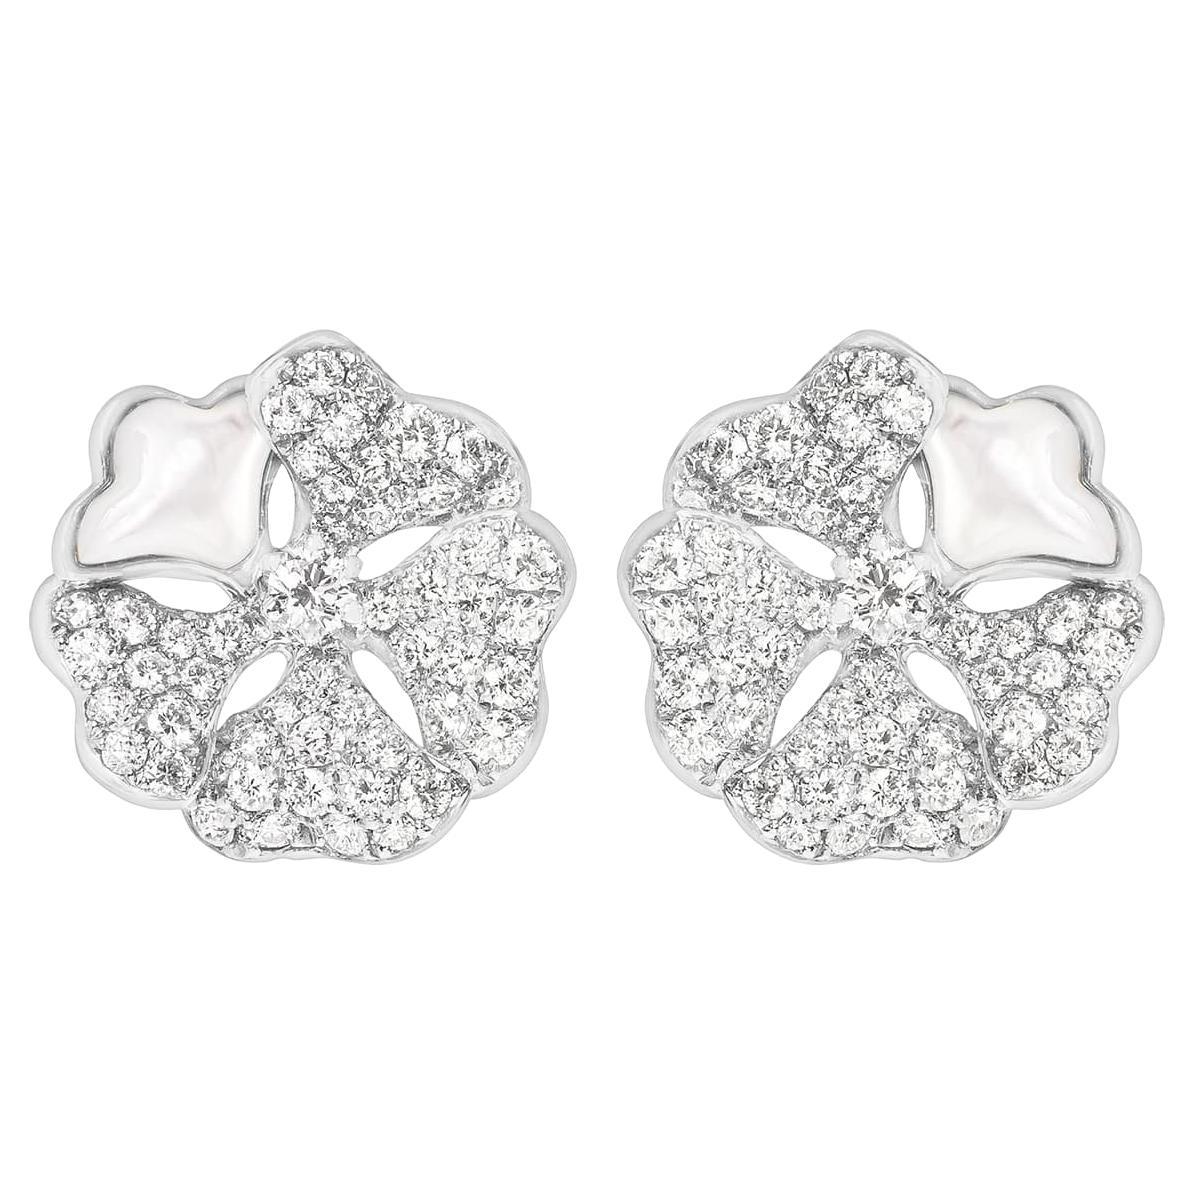 Bloom Diamond and White Mother-of-pearl Bloom Earring Tops in 18k White Gold